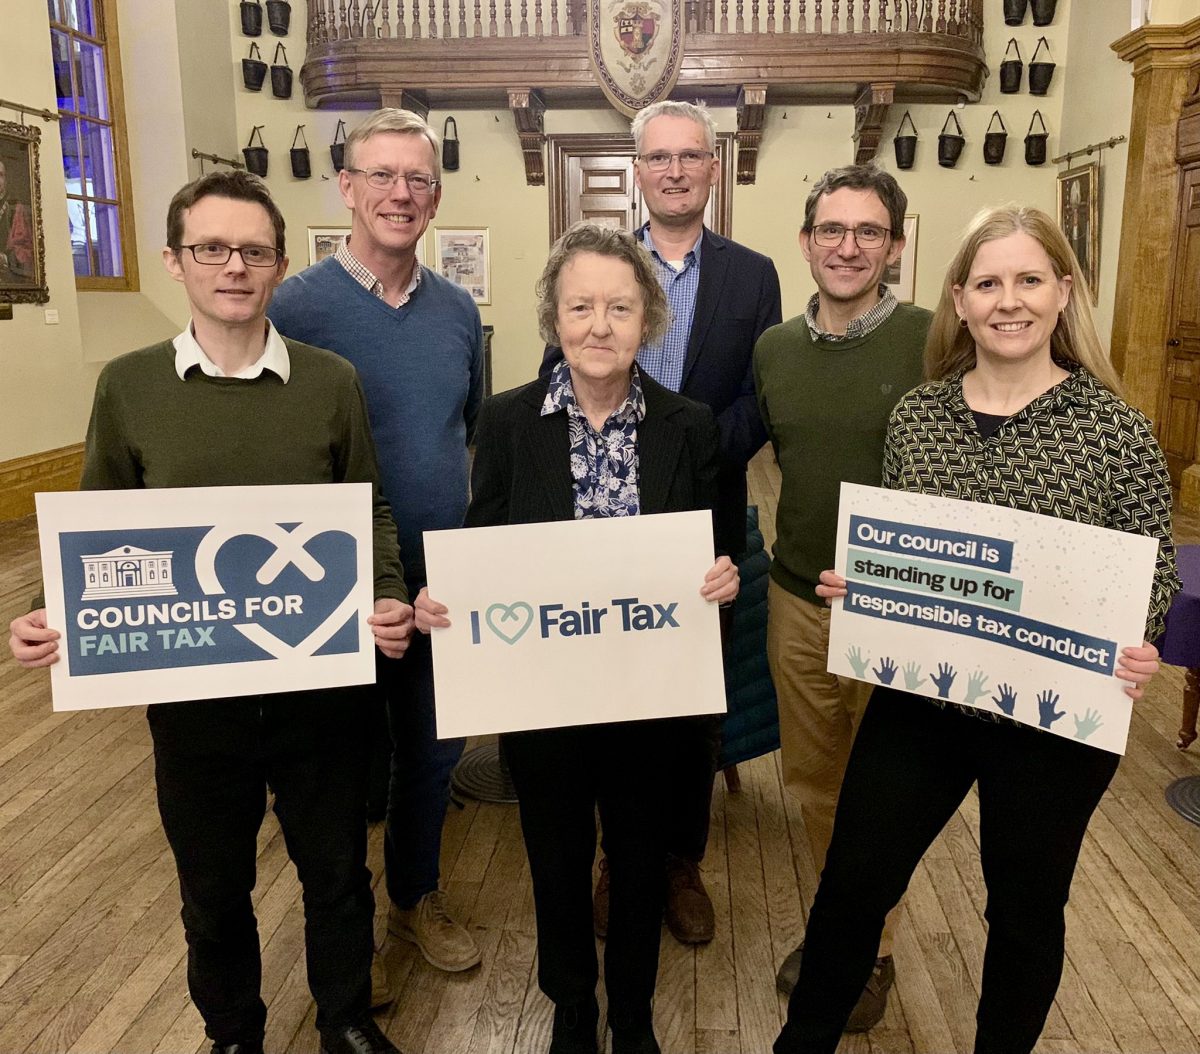 City councillors back pledge to be fair on all tax matters